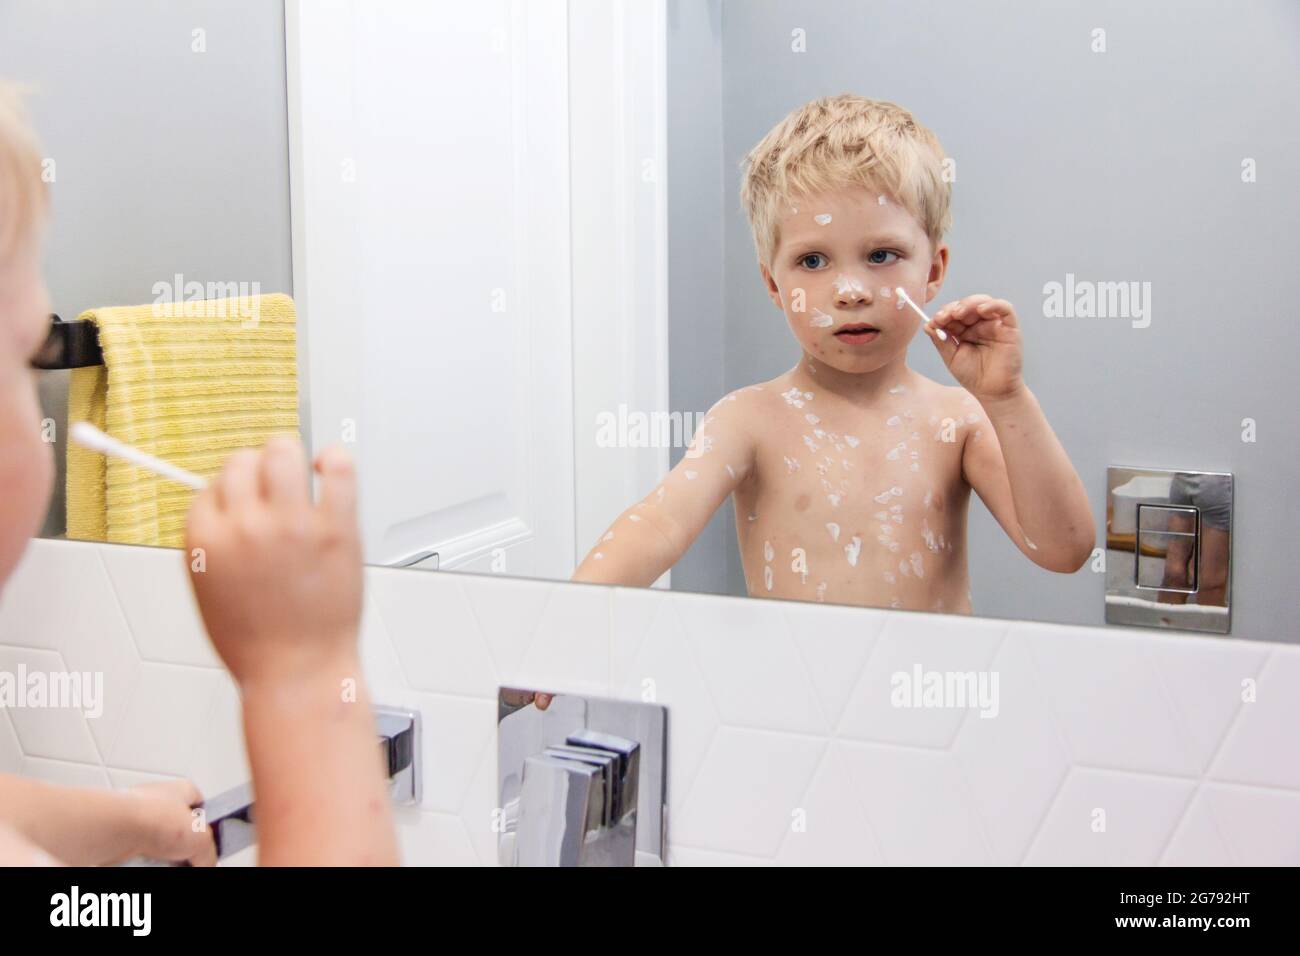 Toddler  blonde boy sick with chickenpox measles on the body uses the medicine. Varicella virus childhood contagious disease. Itchy red blisters, feve Stock Photo